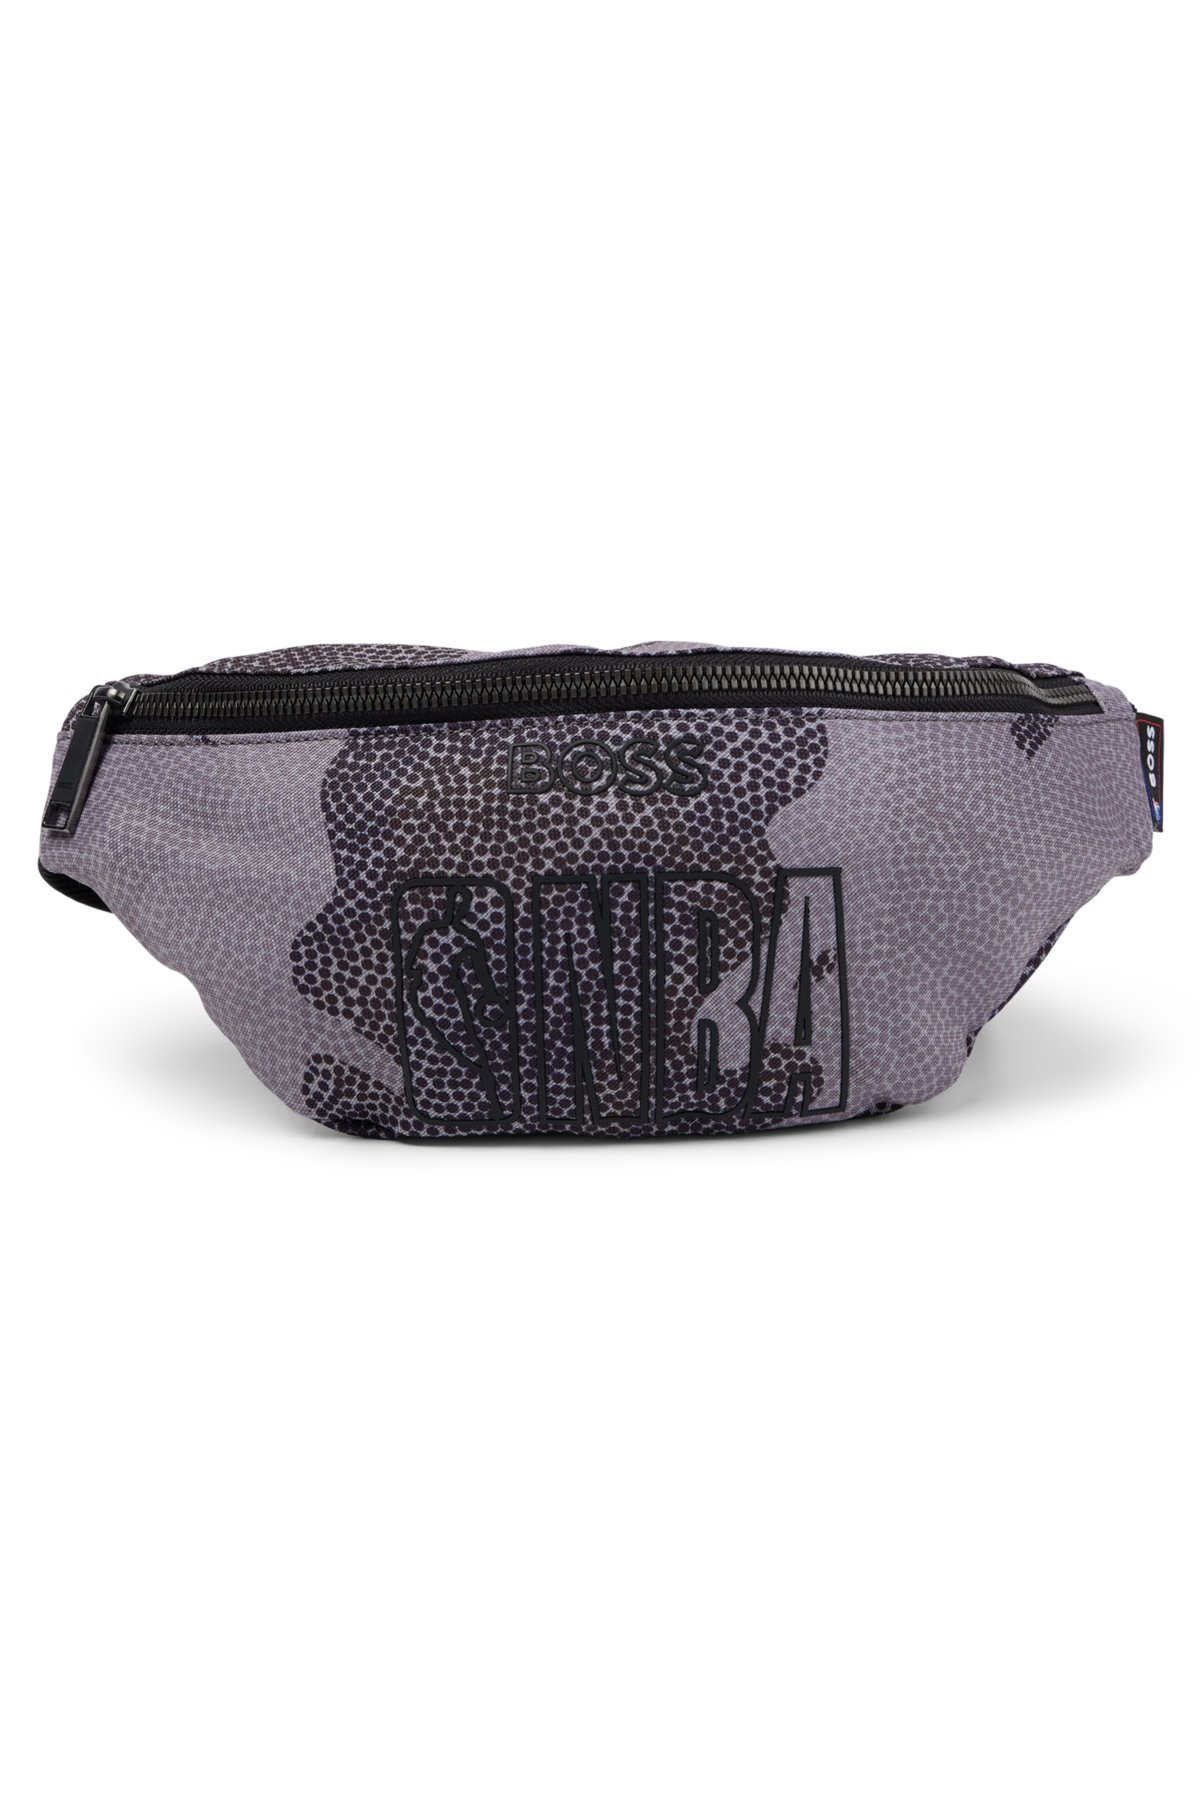 Generic Cool Sequins Printing Waist Bag For Woman Fashion Fanny